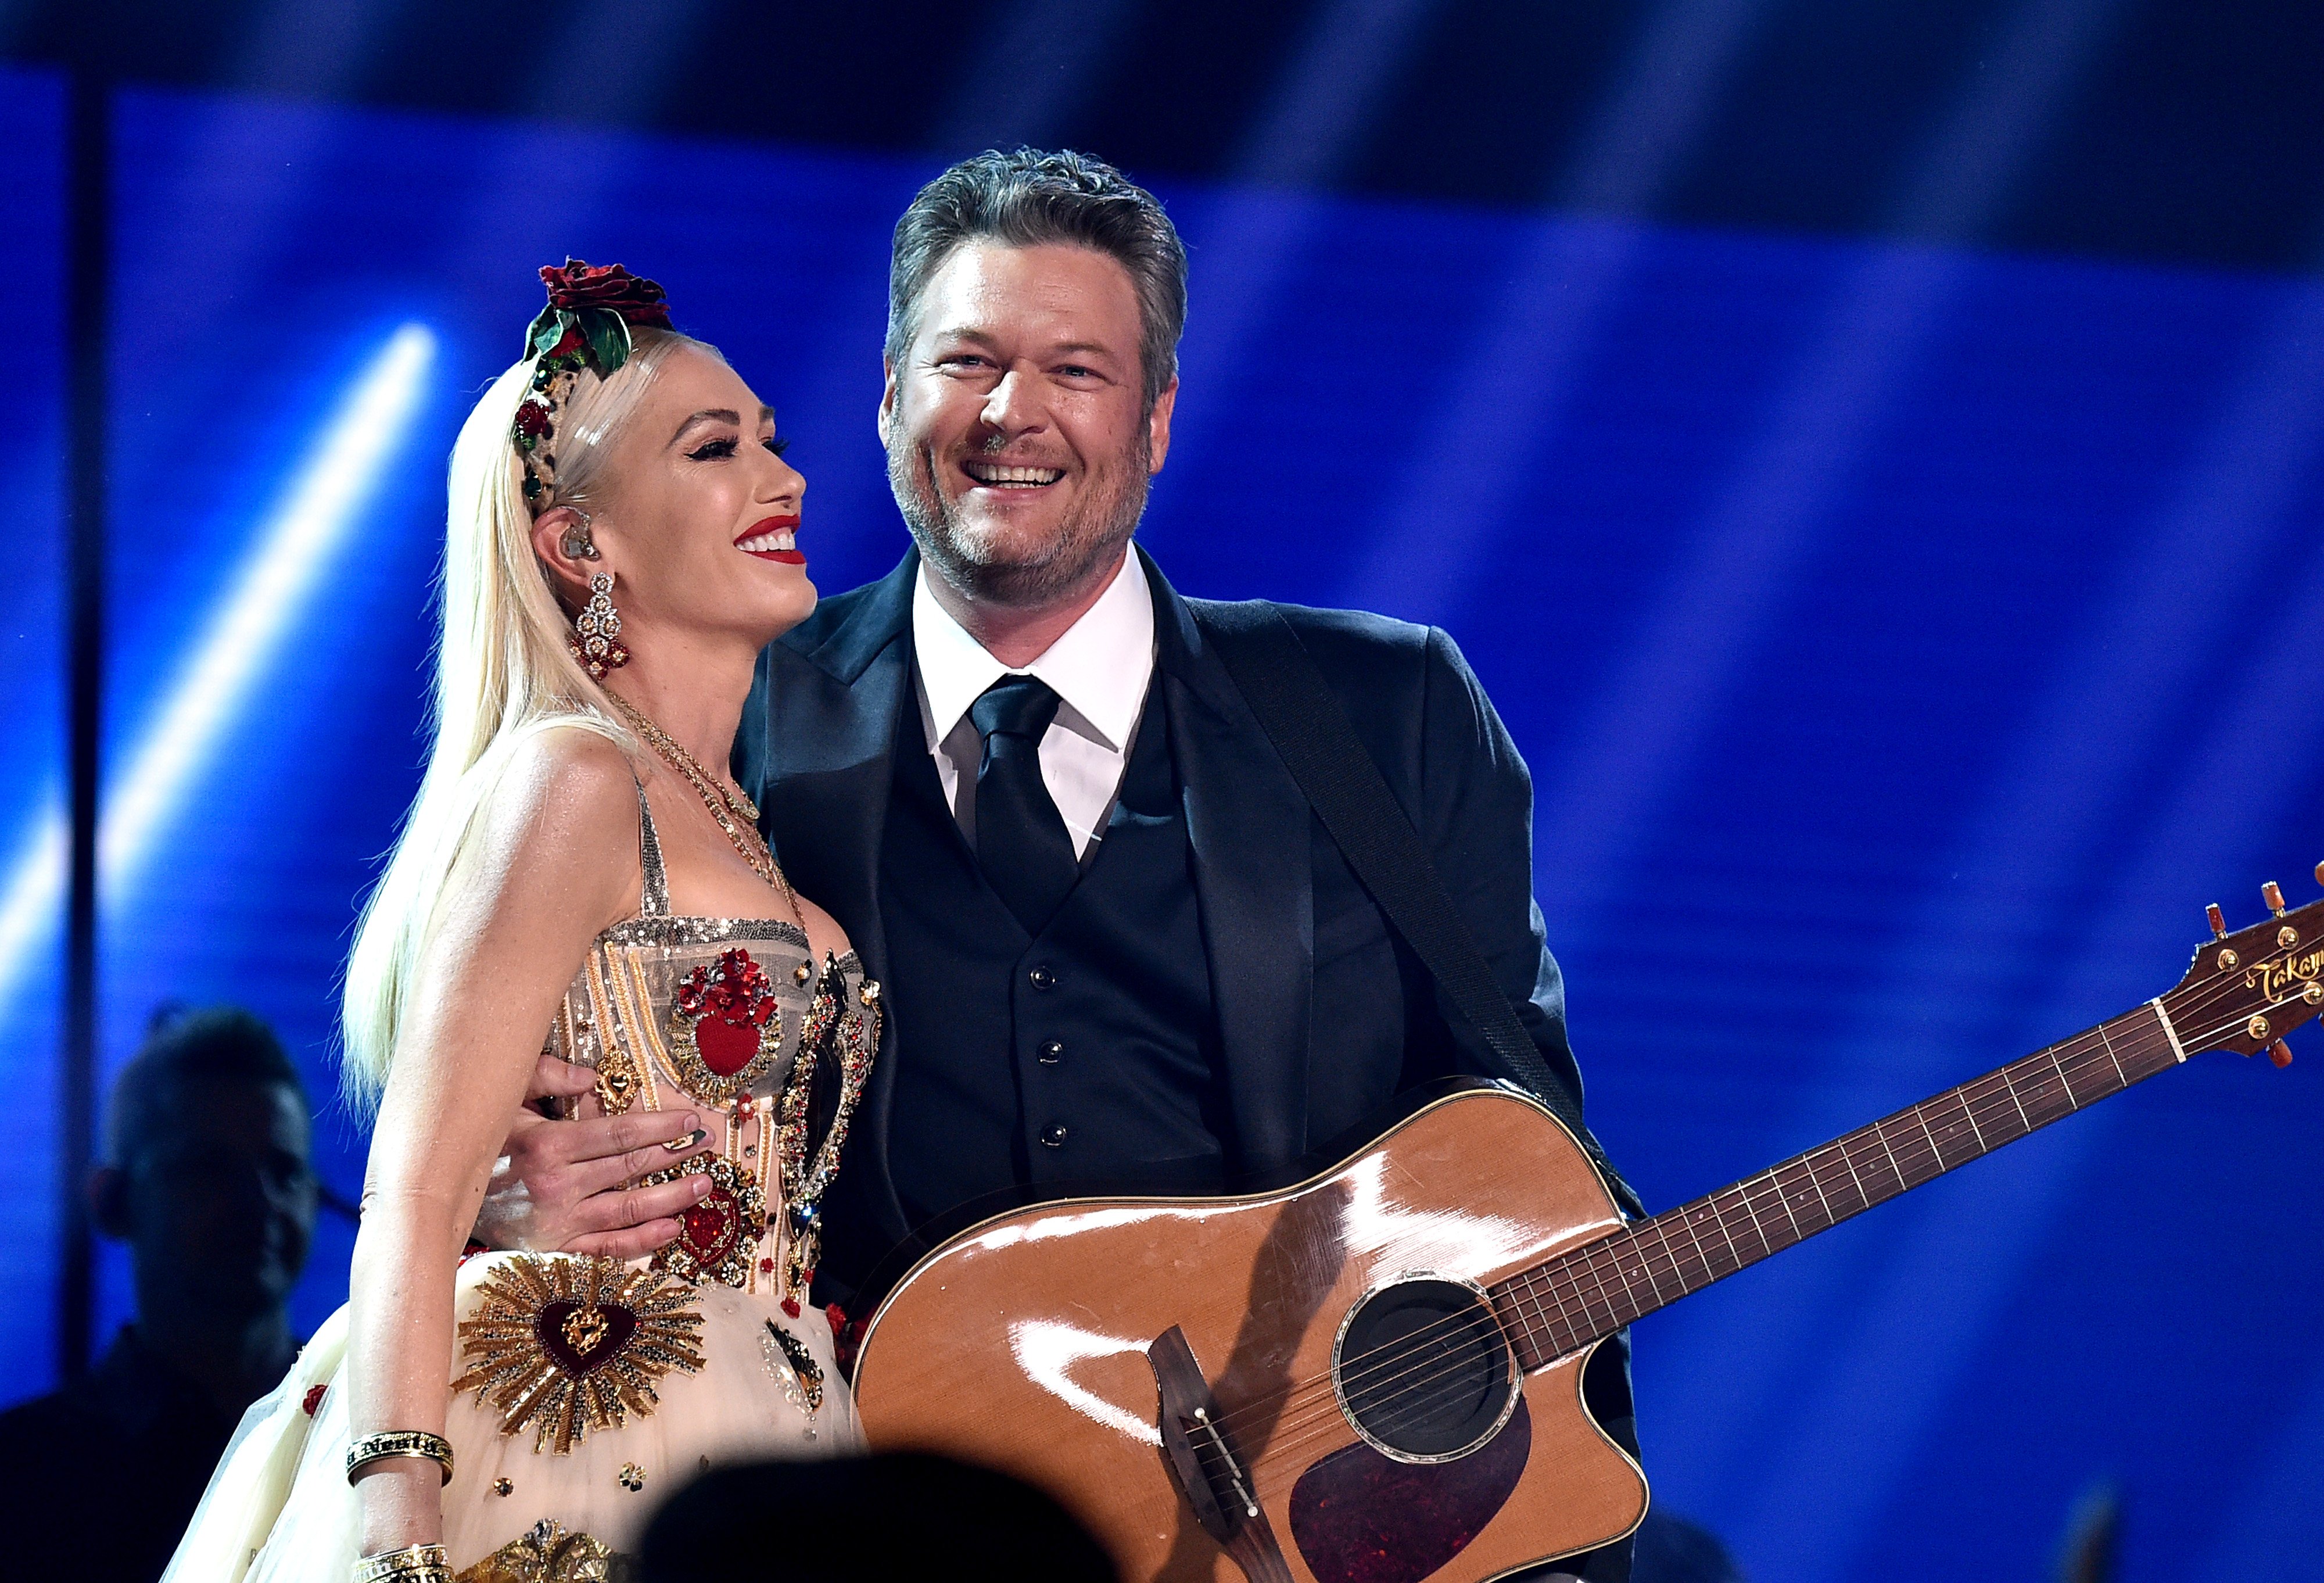 Gwen Stefani and Blake Shelton perform at the 62nd Annual GRAMMY Awards on January 26, 2020. | Photo: Getty Images